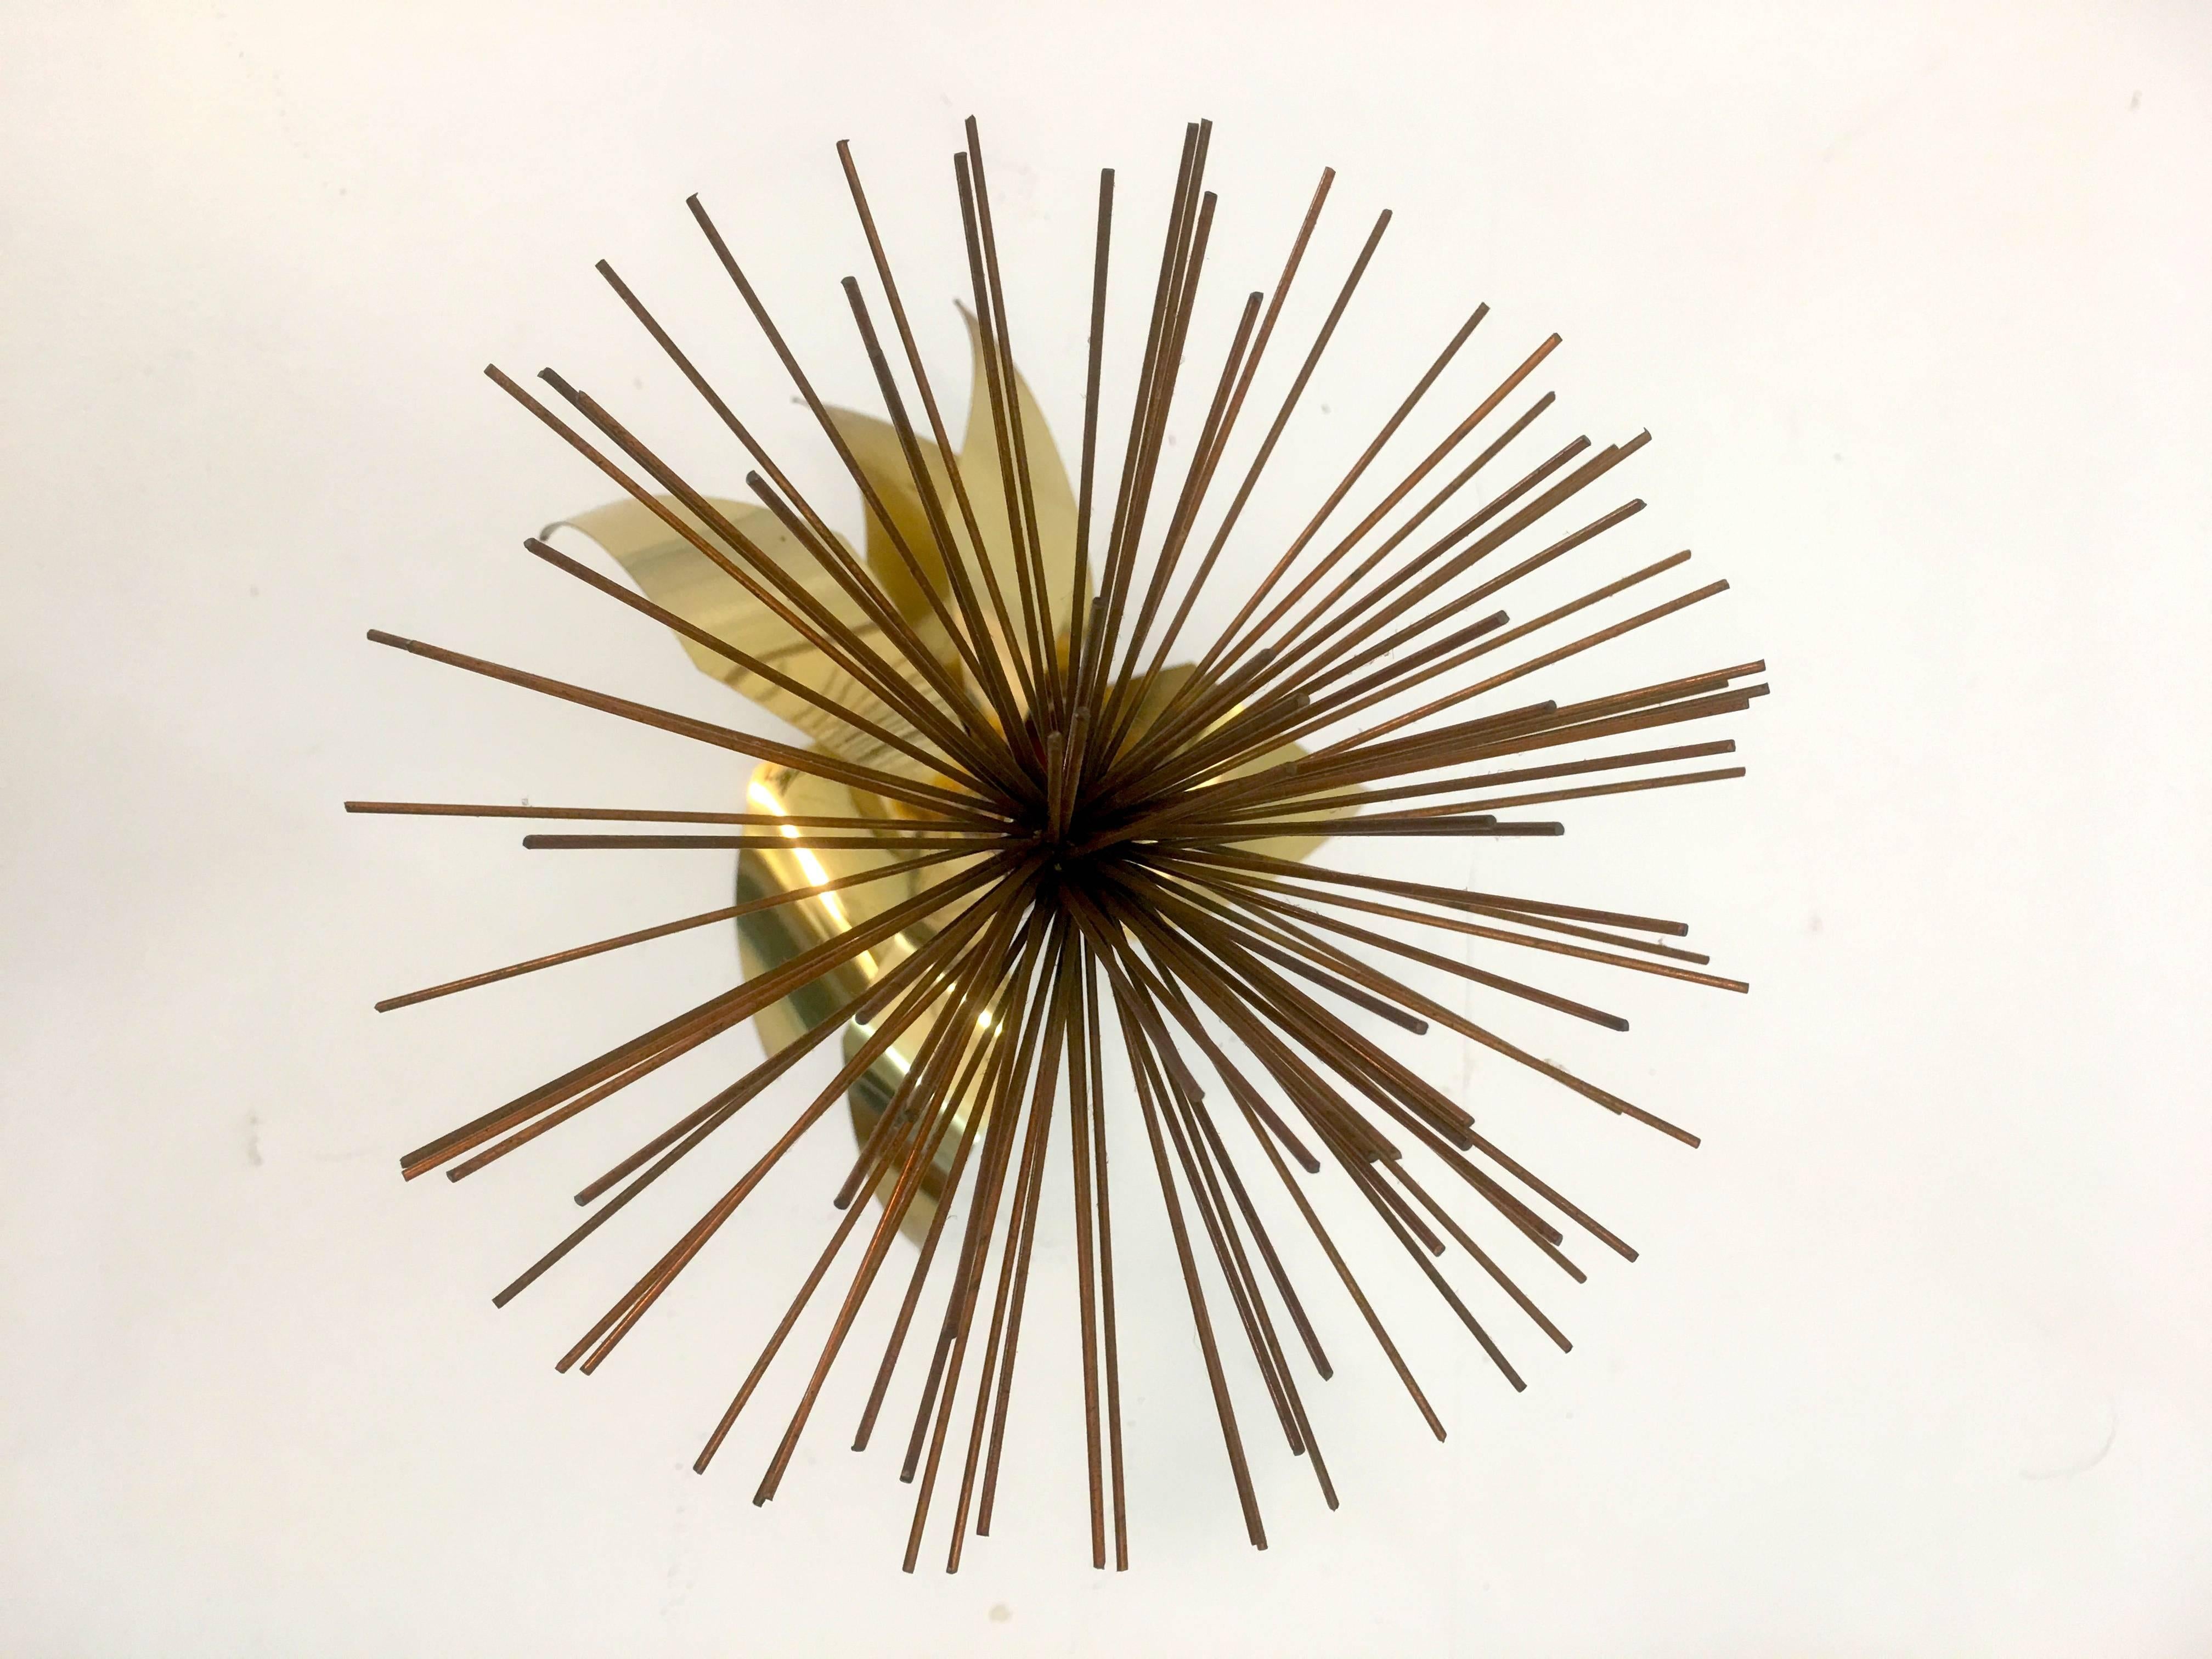 Signed but undated and likely produced 1979-1981, this sculpture by C. Jere is a mixed metal sculpture deploying copper, brass and steel to create what is sometimes referred to as also the pom pom or sea urchin style splayed element that was used in